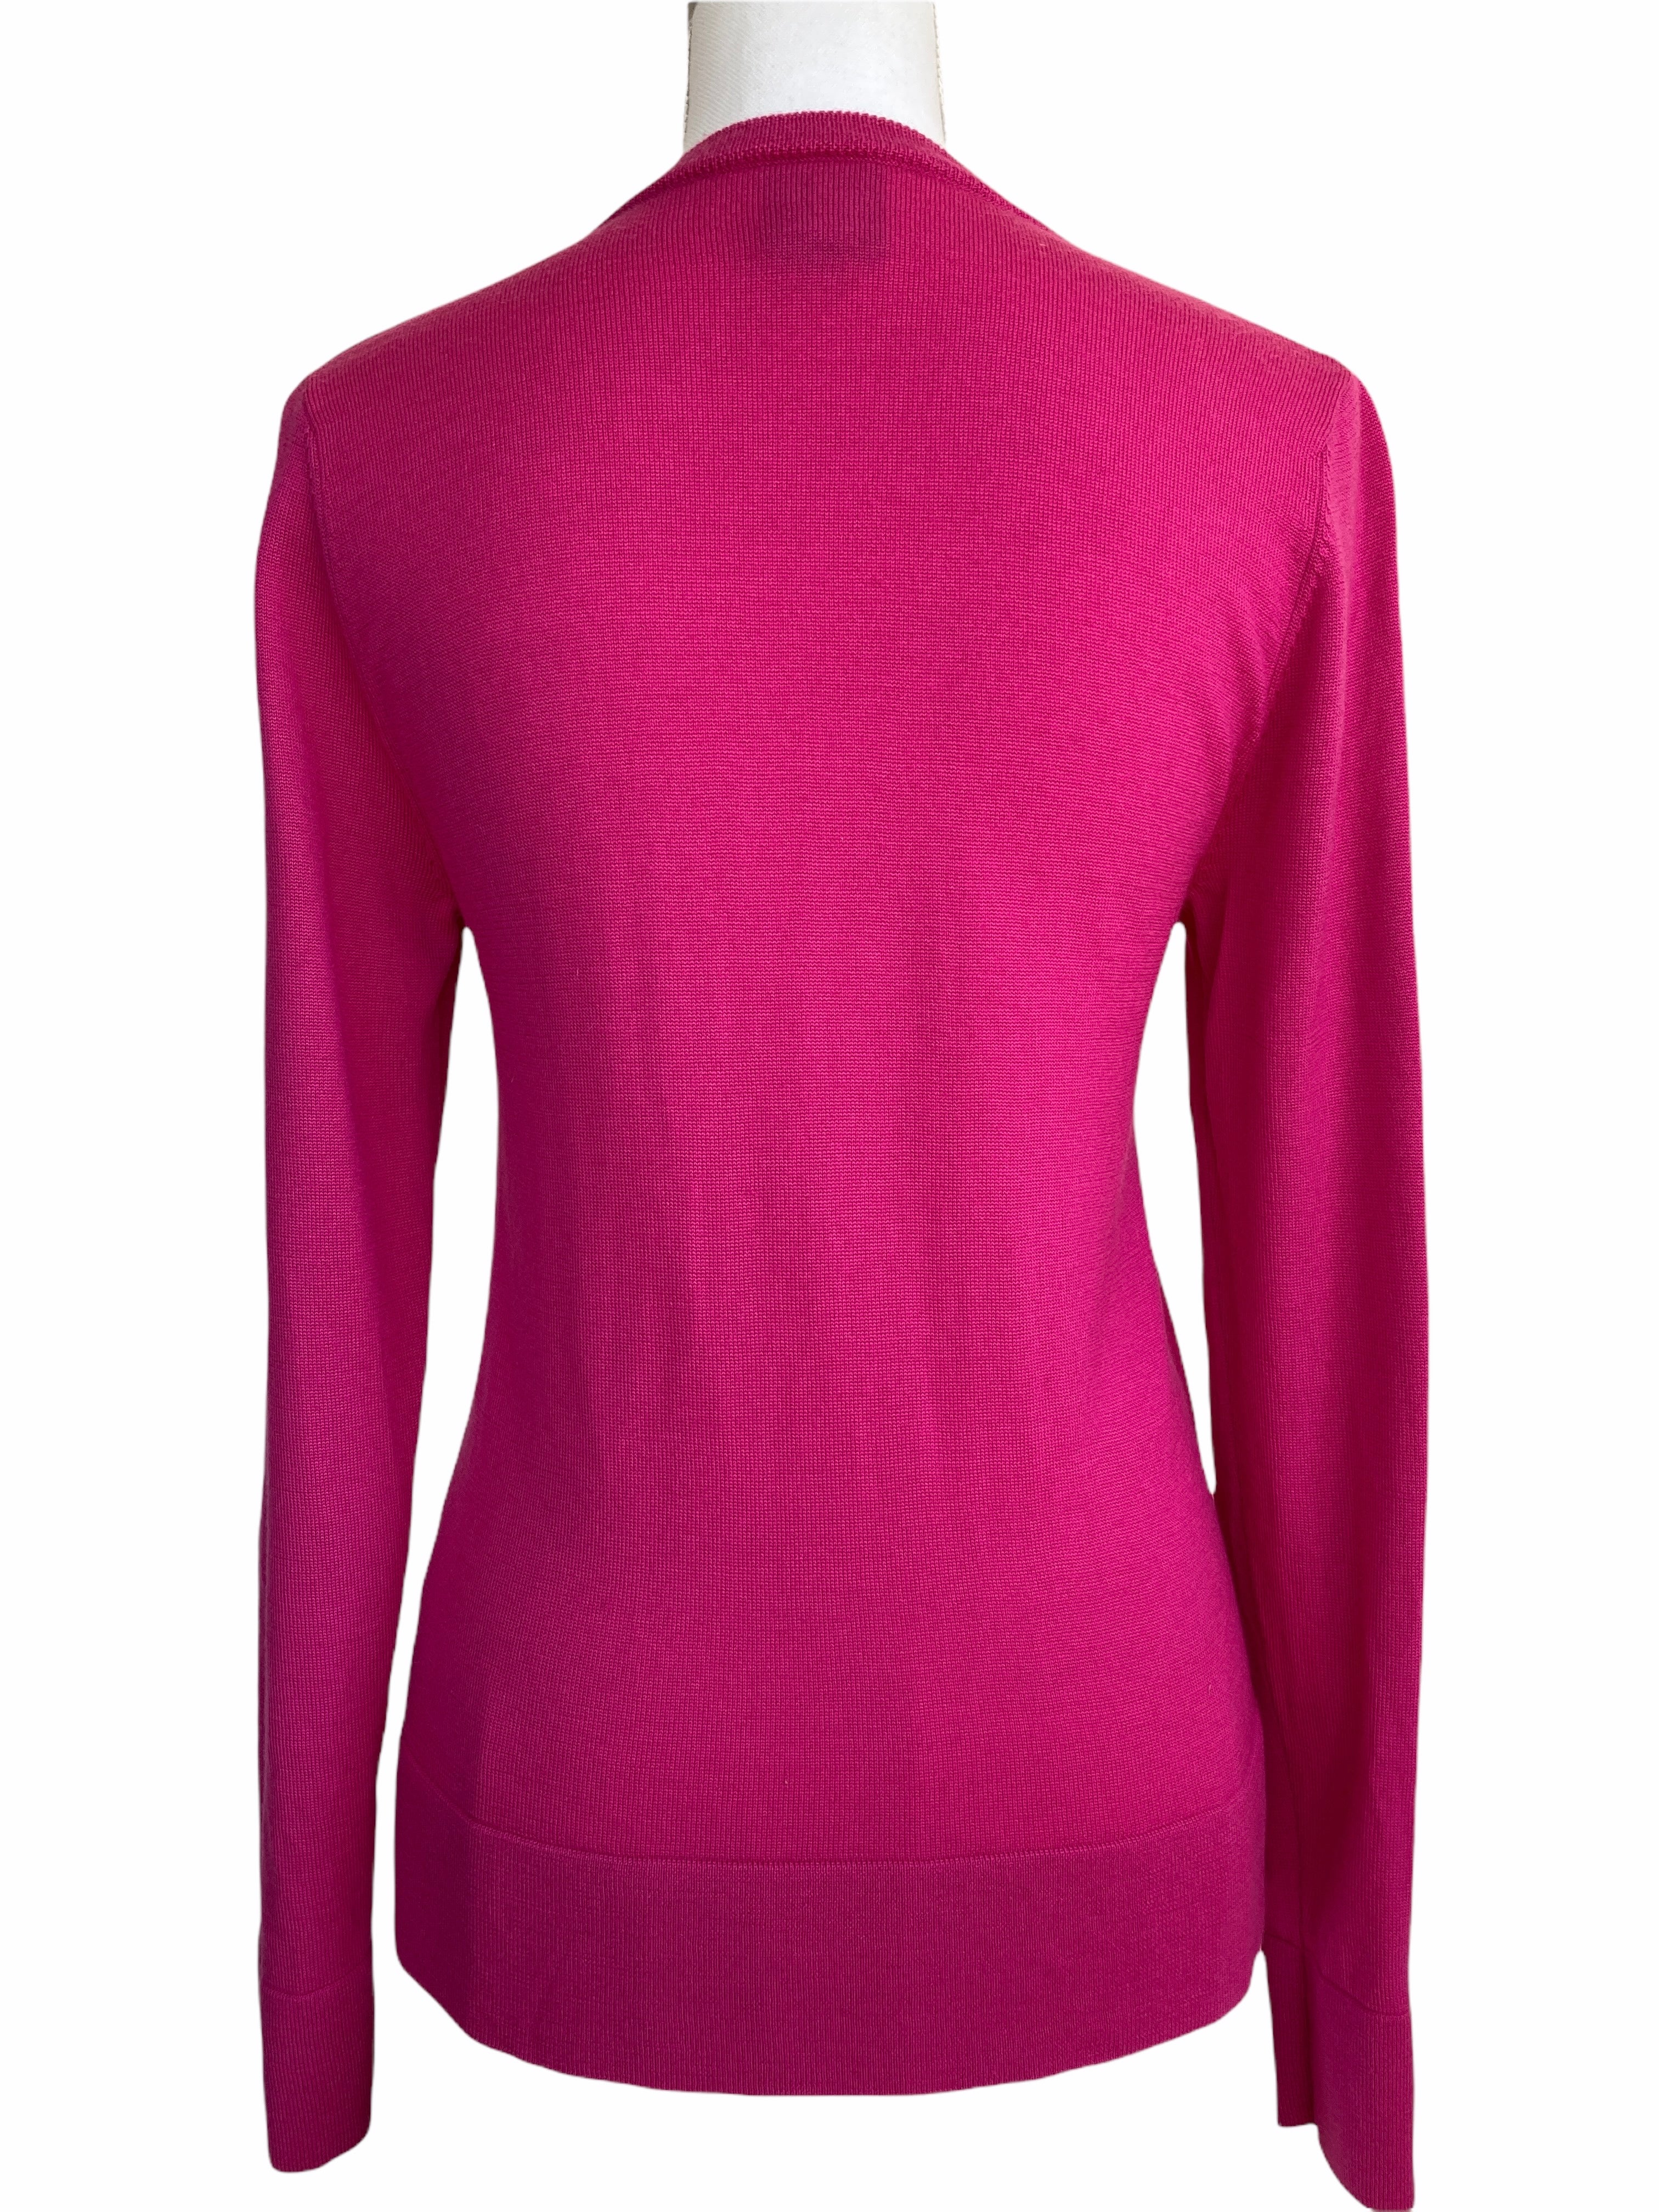 Tory Burch Pink Sequin Sweater, M